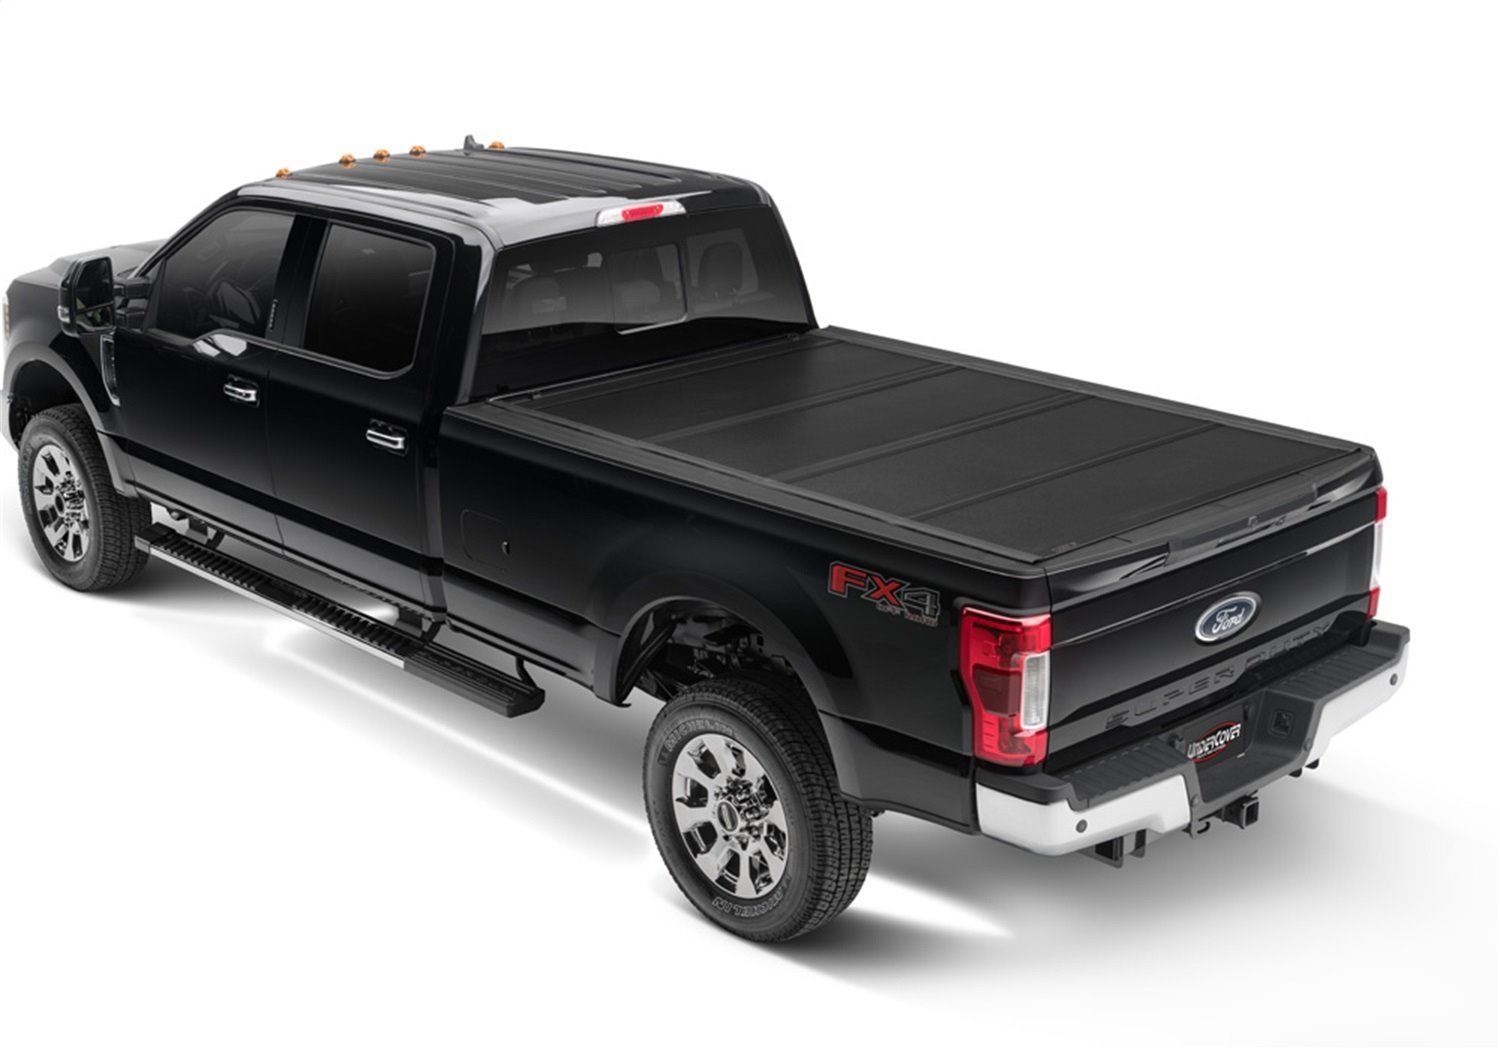 AX22026 Armor Flex Hard Folding Cover, Fits Select Ford F-250/350 8'2" Bed STD/EXT/Crew, Black Textured